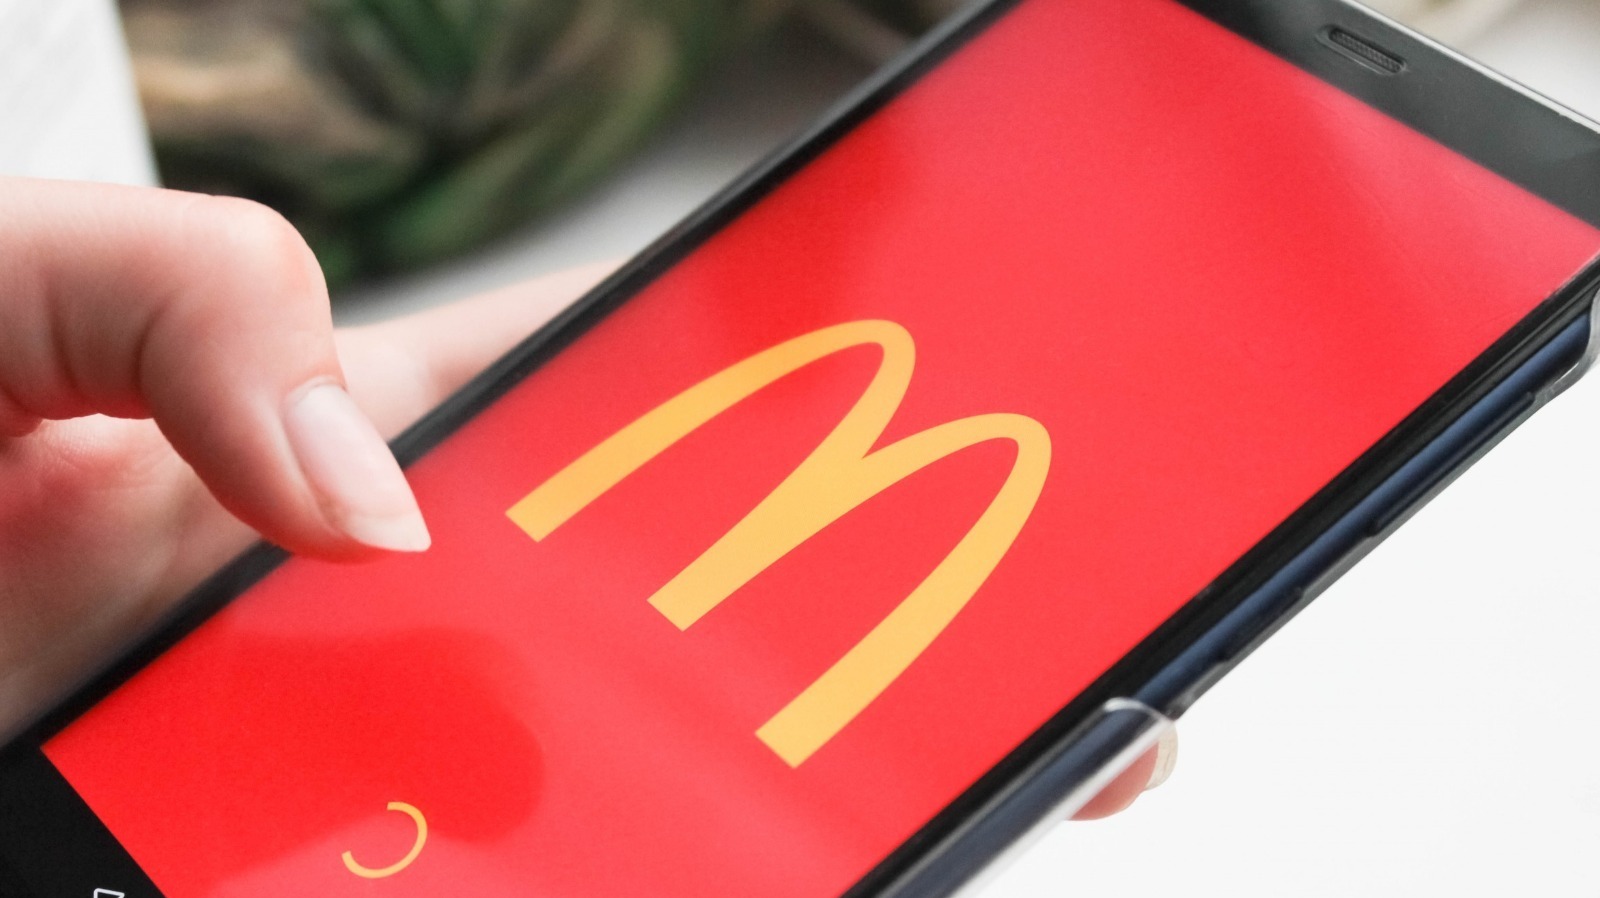 Don't Fall For This McDonald's Email Scam